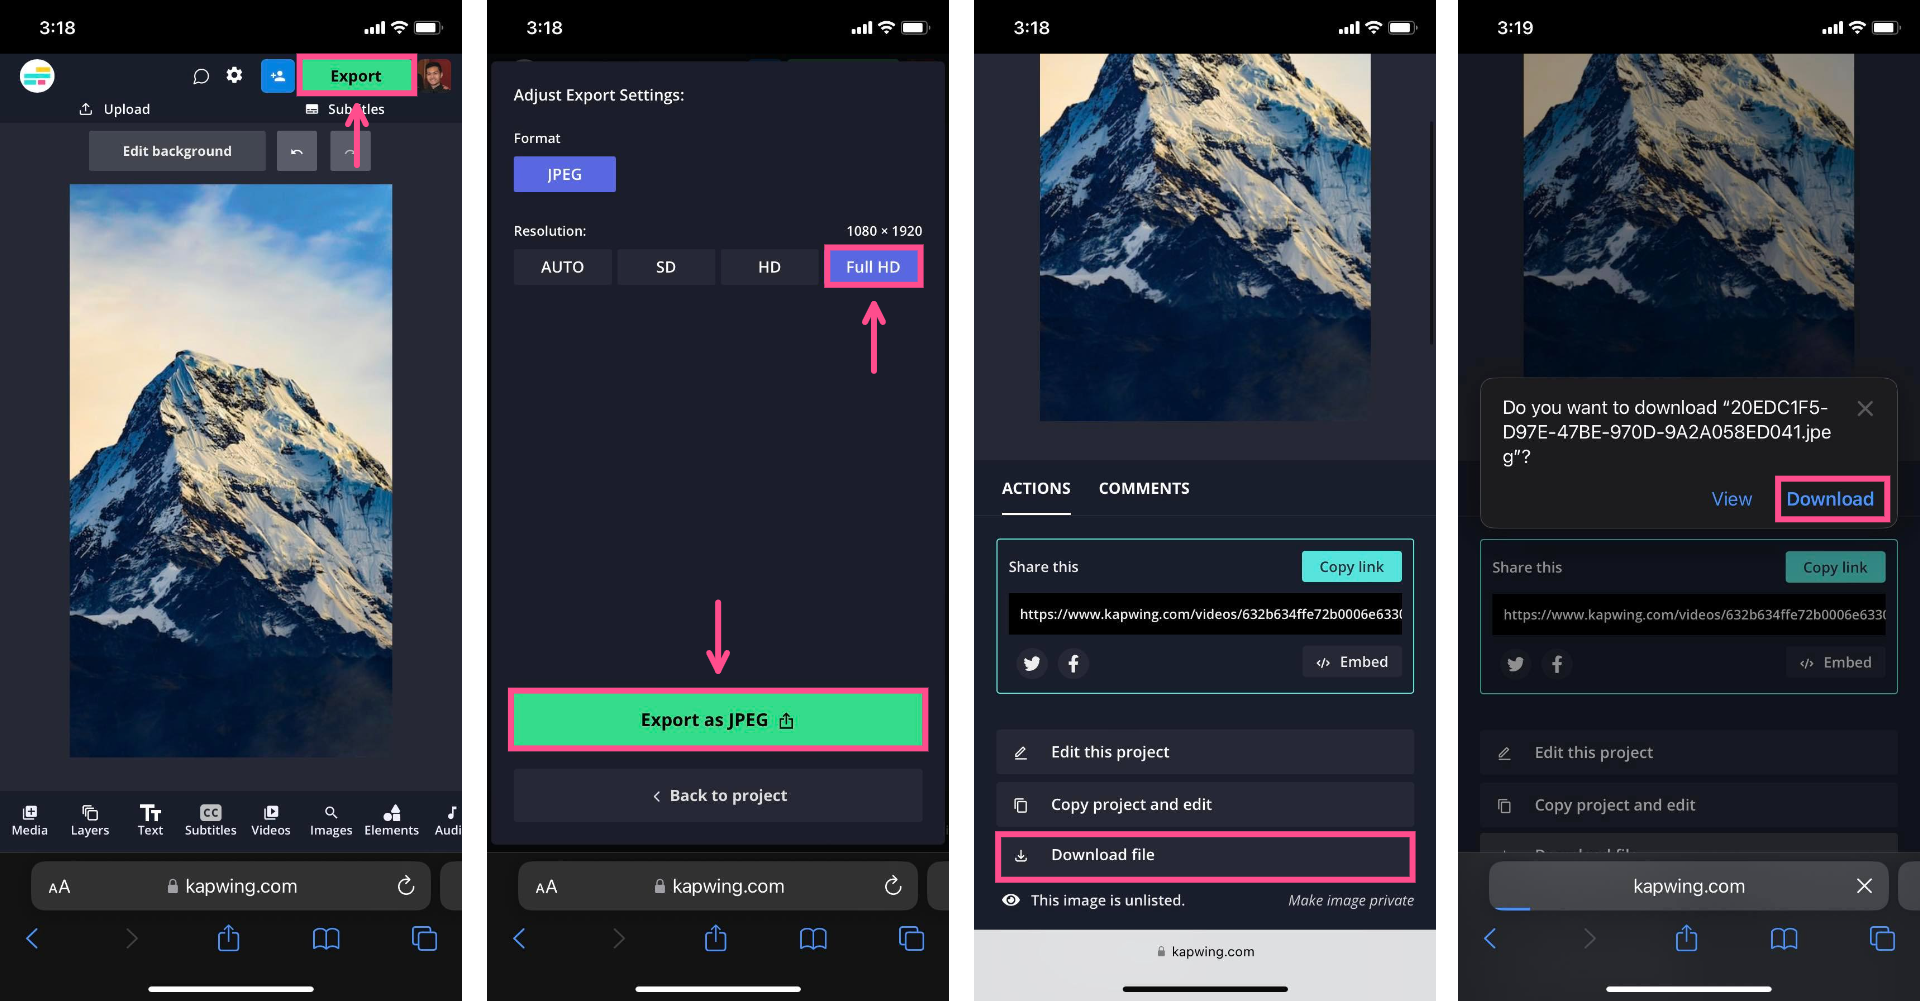 Screenshots showing how to Export and Download a project from Kapwing on a mobile device